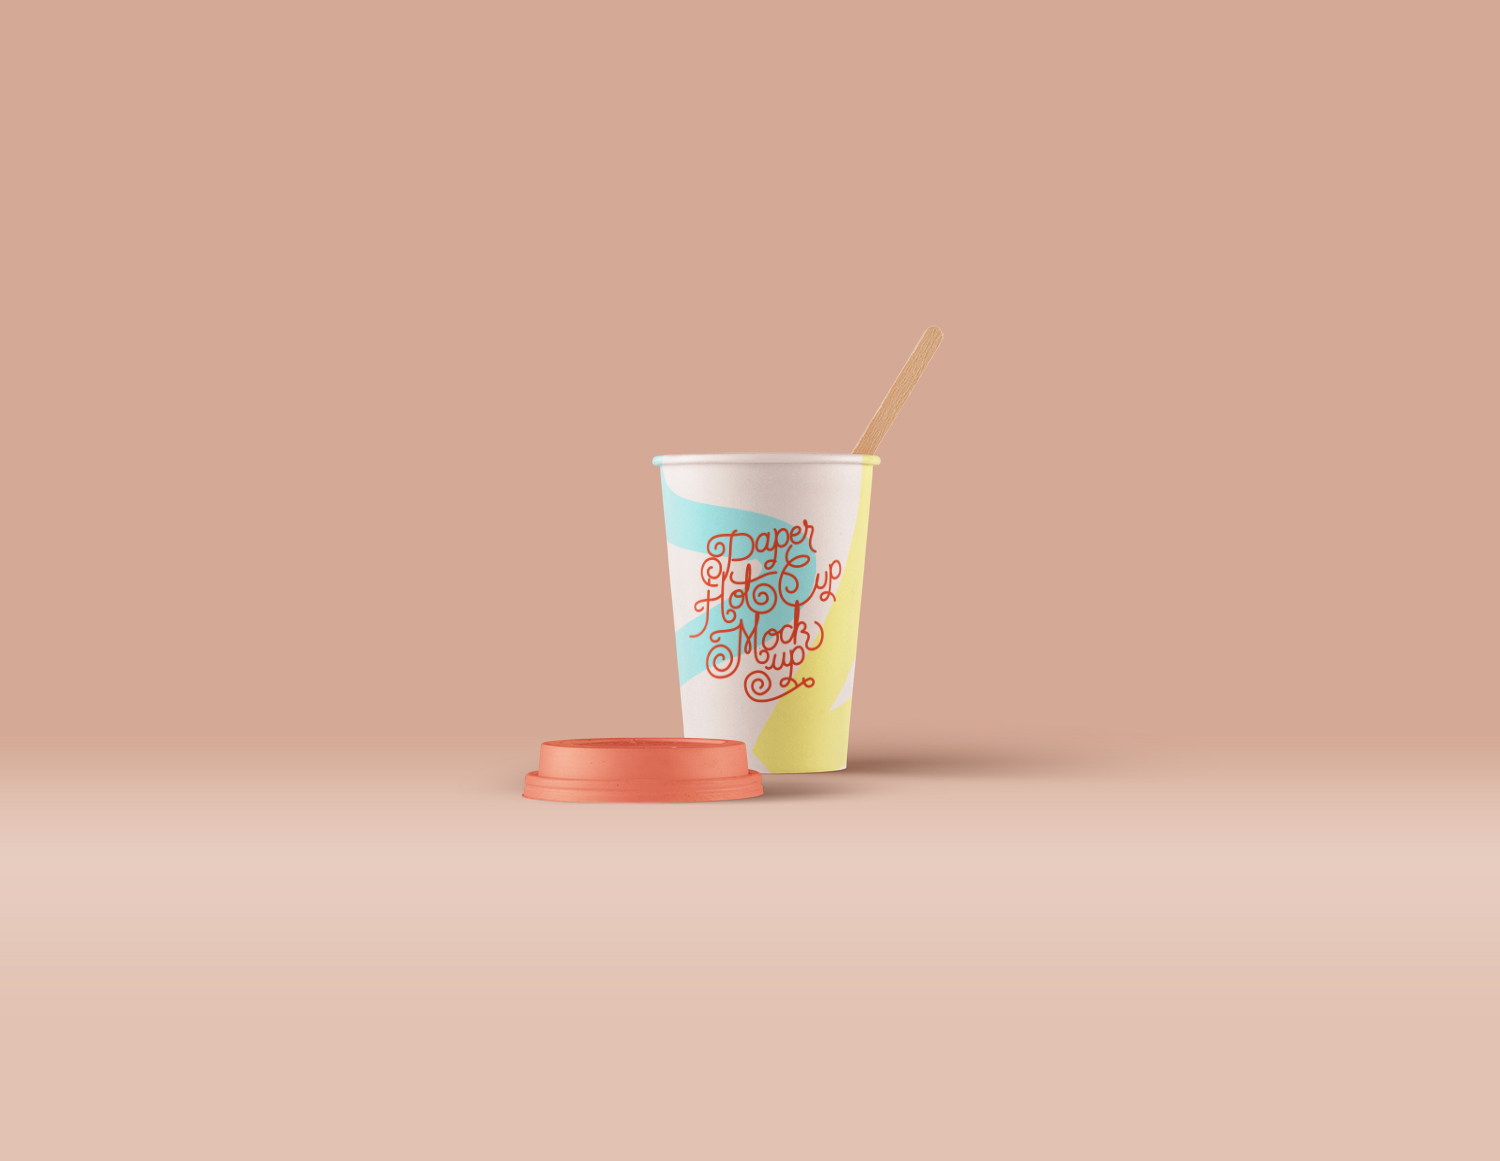 Psd Paper Hot Cup Template